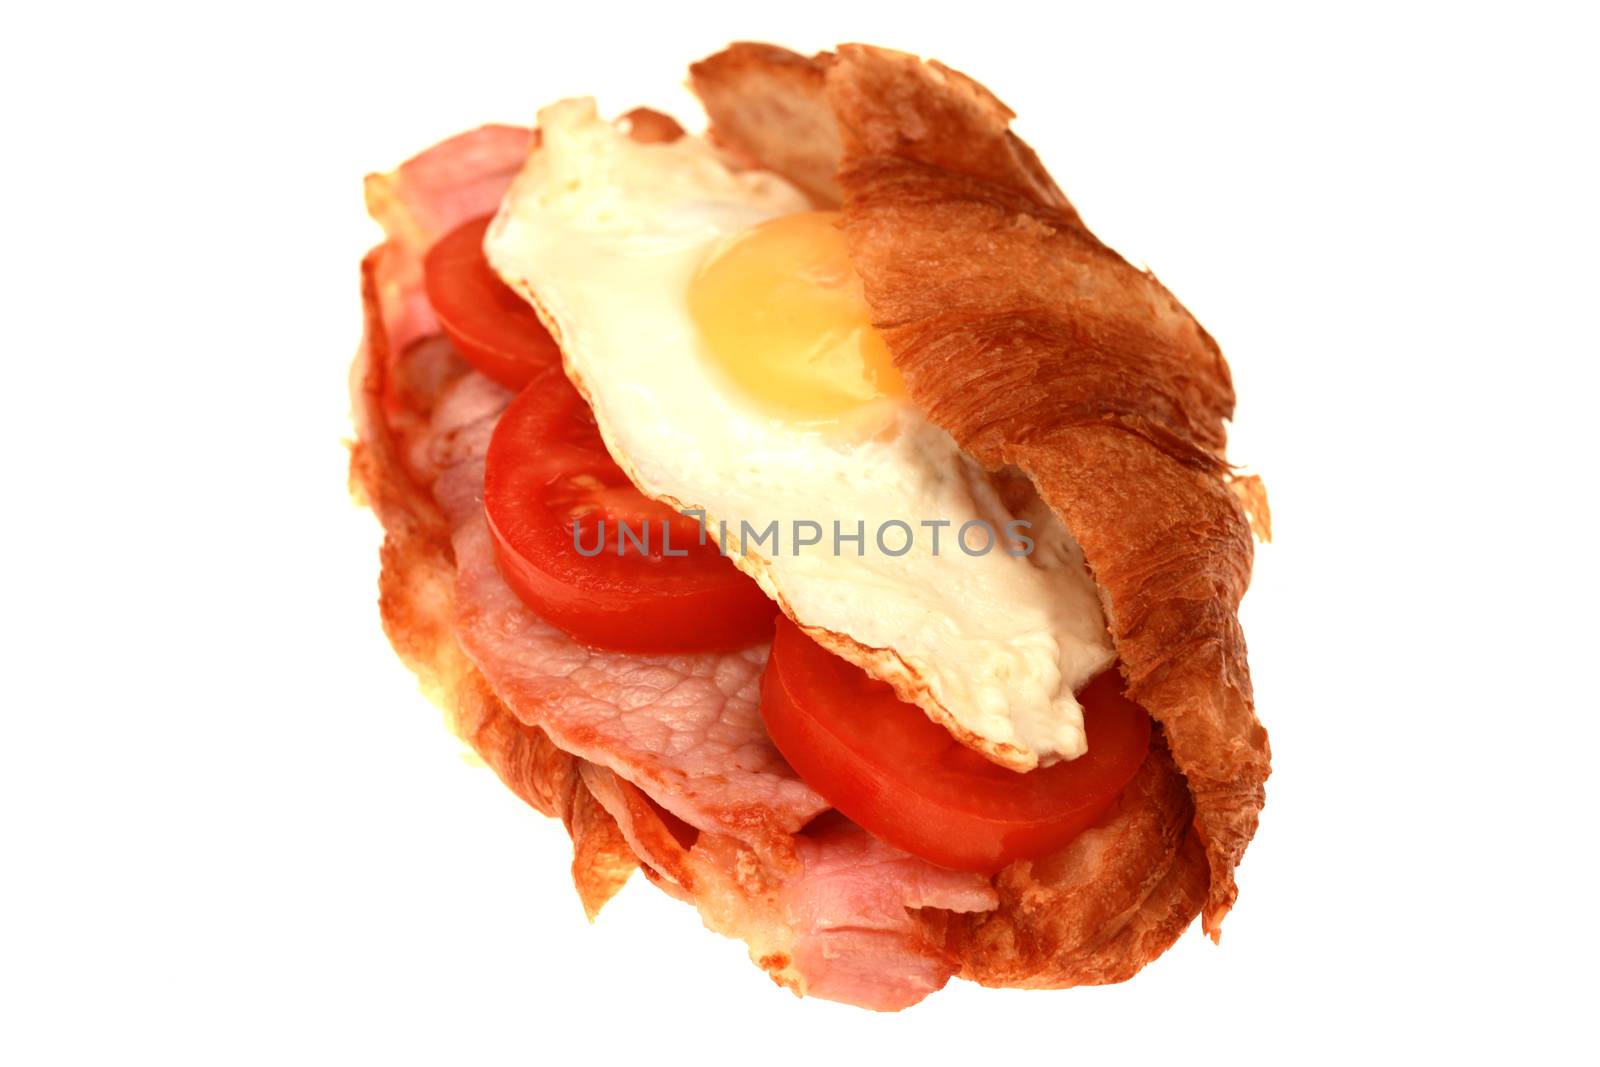 Bacon and Egg Croissant by Whiteboxmedia